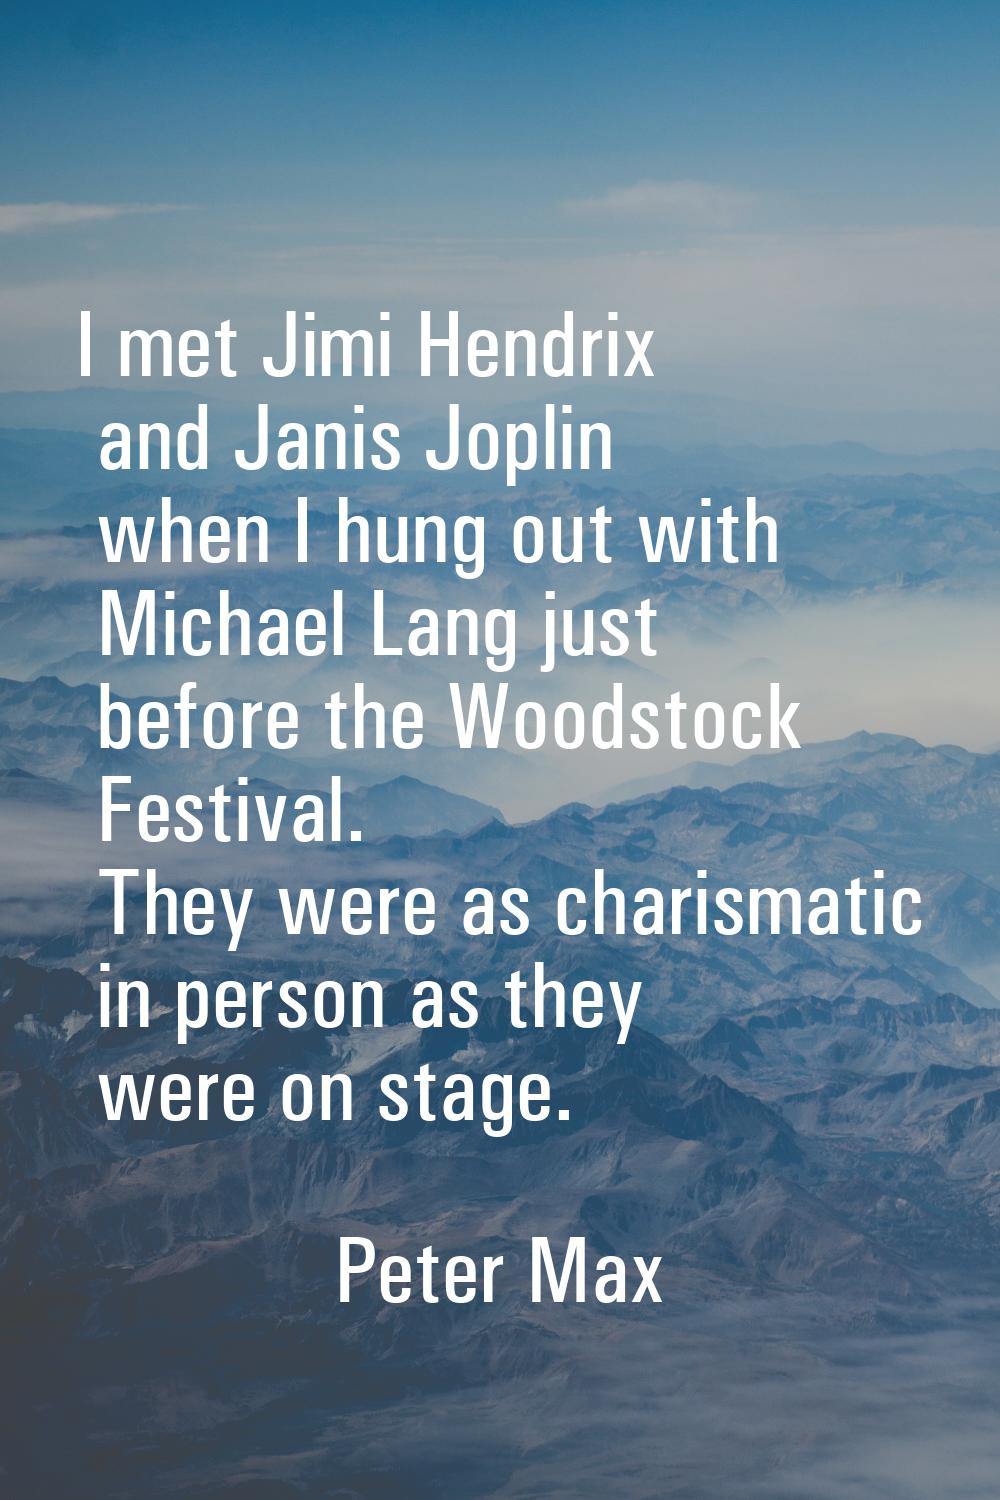 I met Jimi Hendrix and Janis Joplin when I hung out with Michael Lang just before the Woodstock Fes